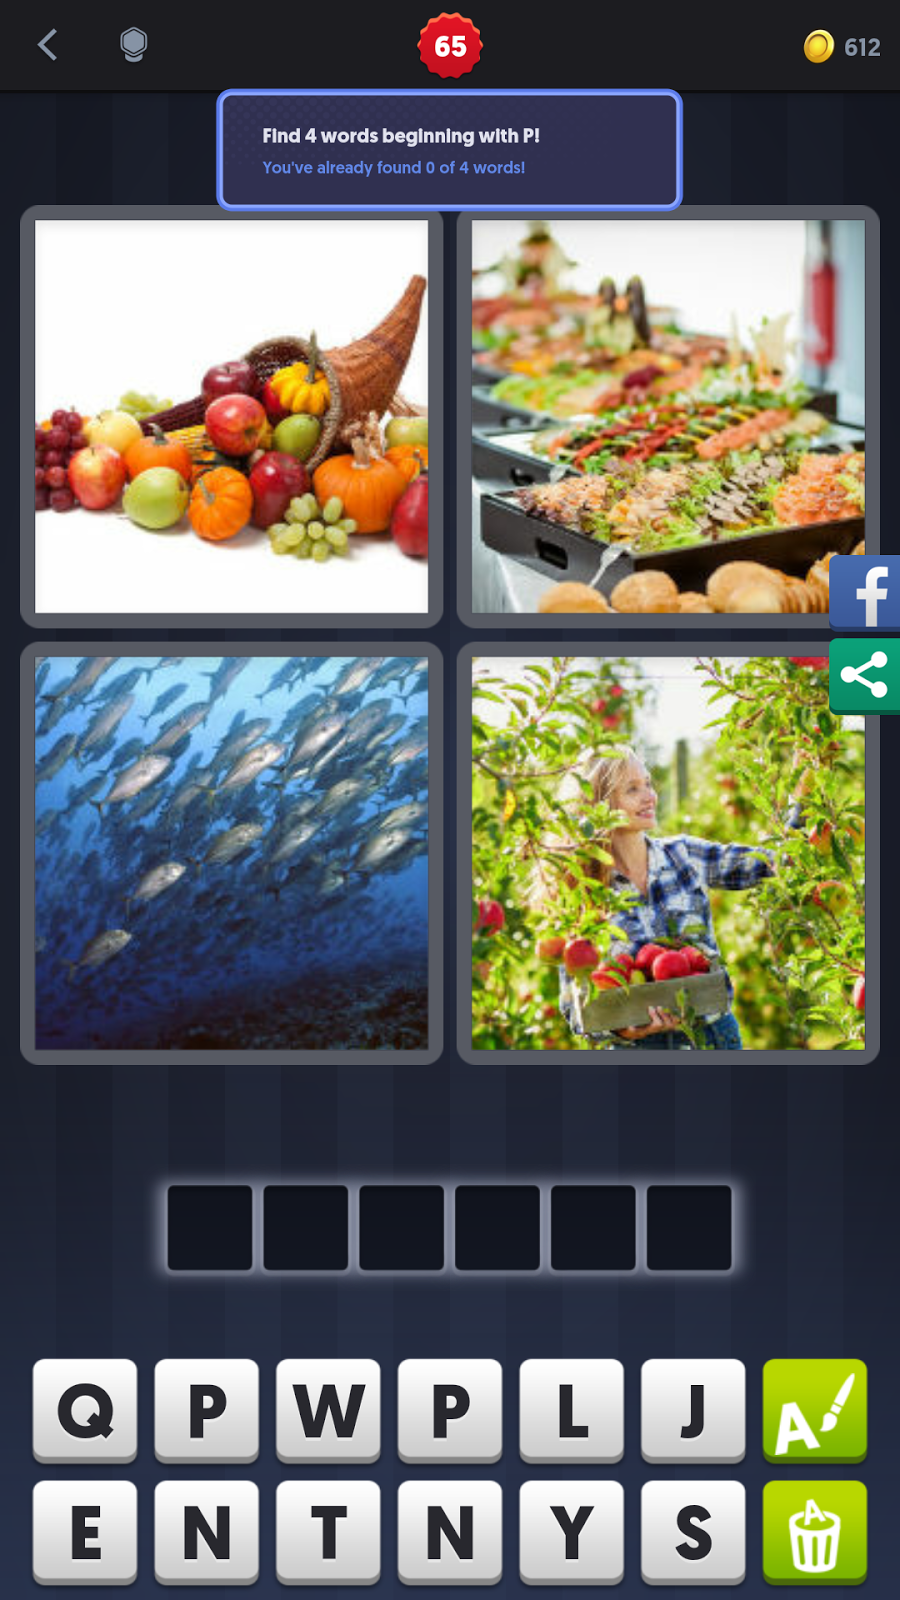 4 Pics 1 Word Level 69 4pics1word Wordgames Mobilegames | Images and ...